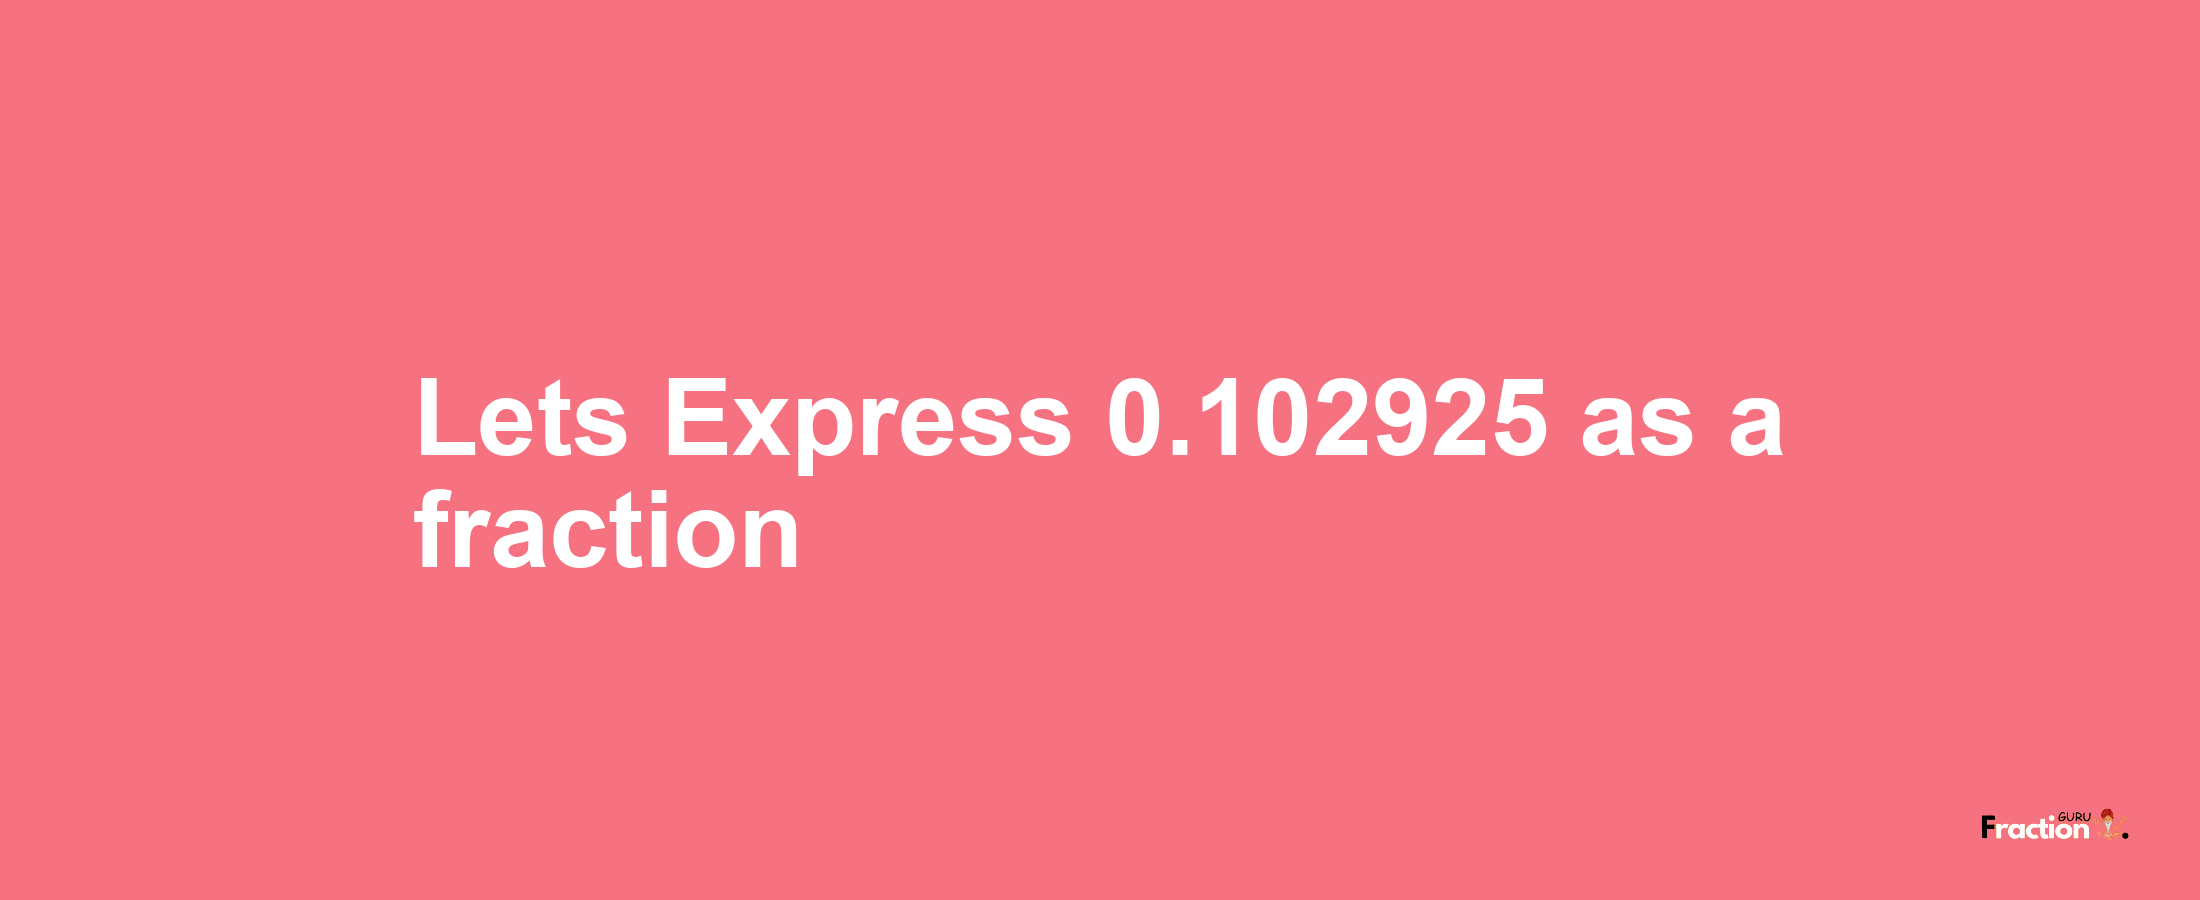 Lets Express 0.102925 as afraction